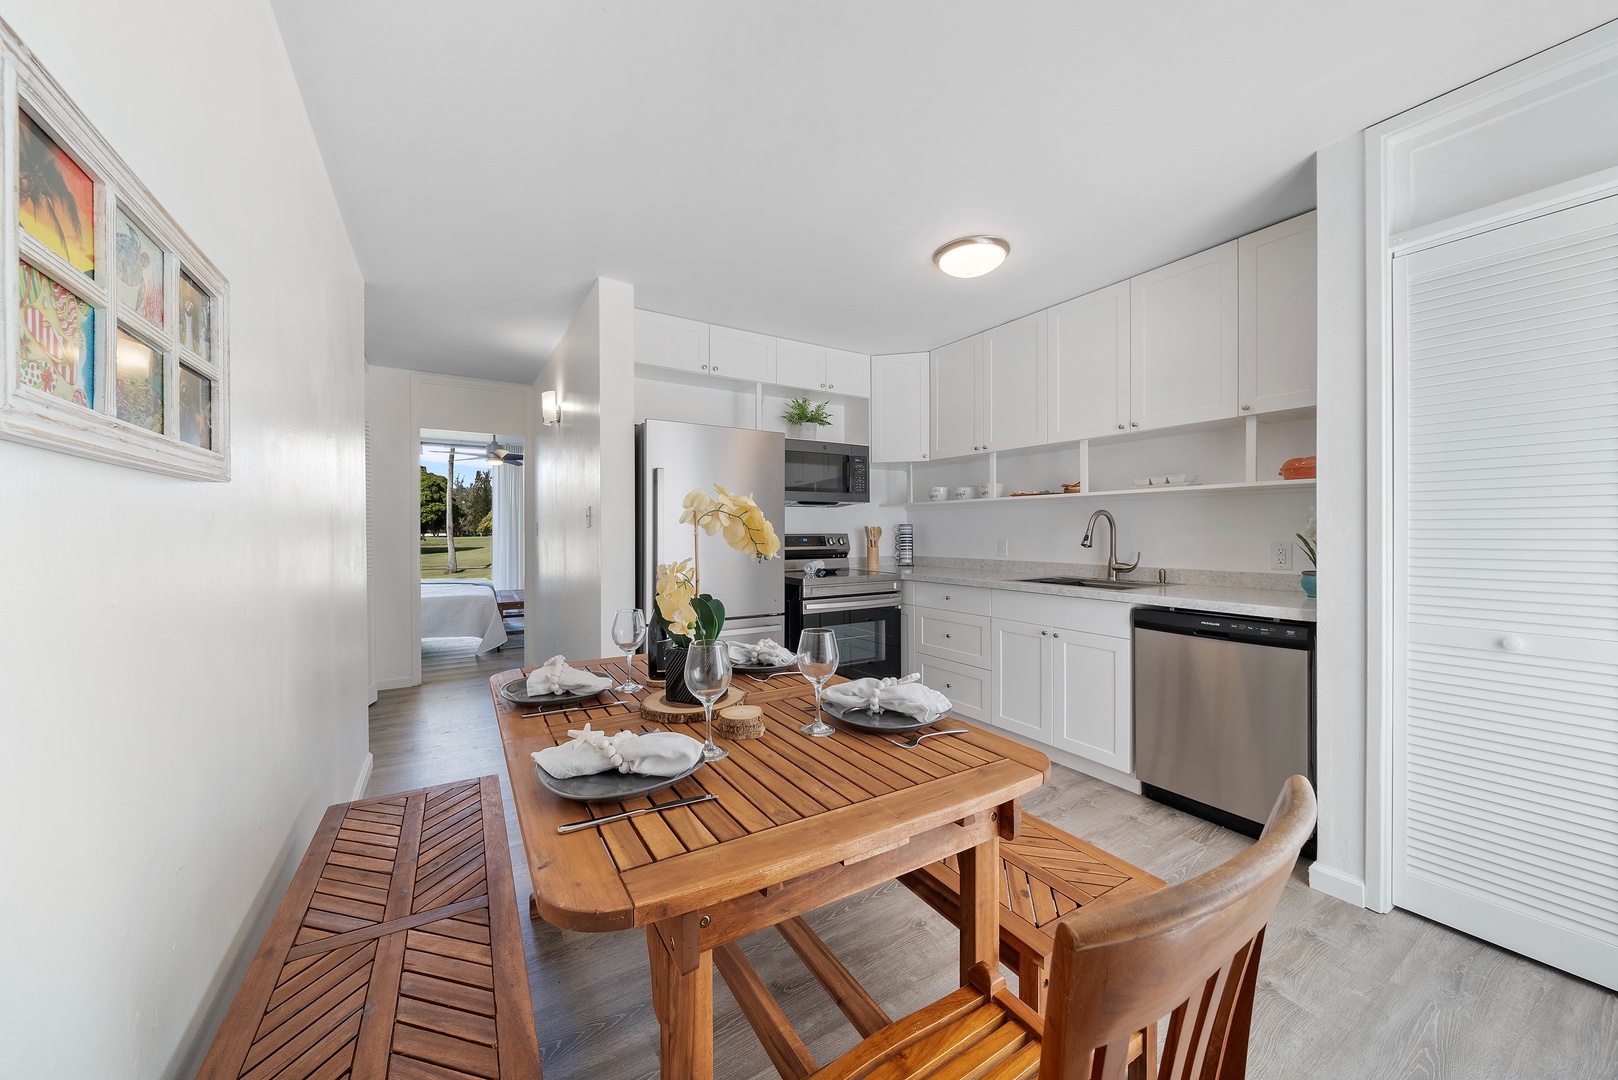 Kahuku Vacation Rentals, Kuilima Estates West #85 - Full size kitchen with dining table.